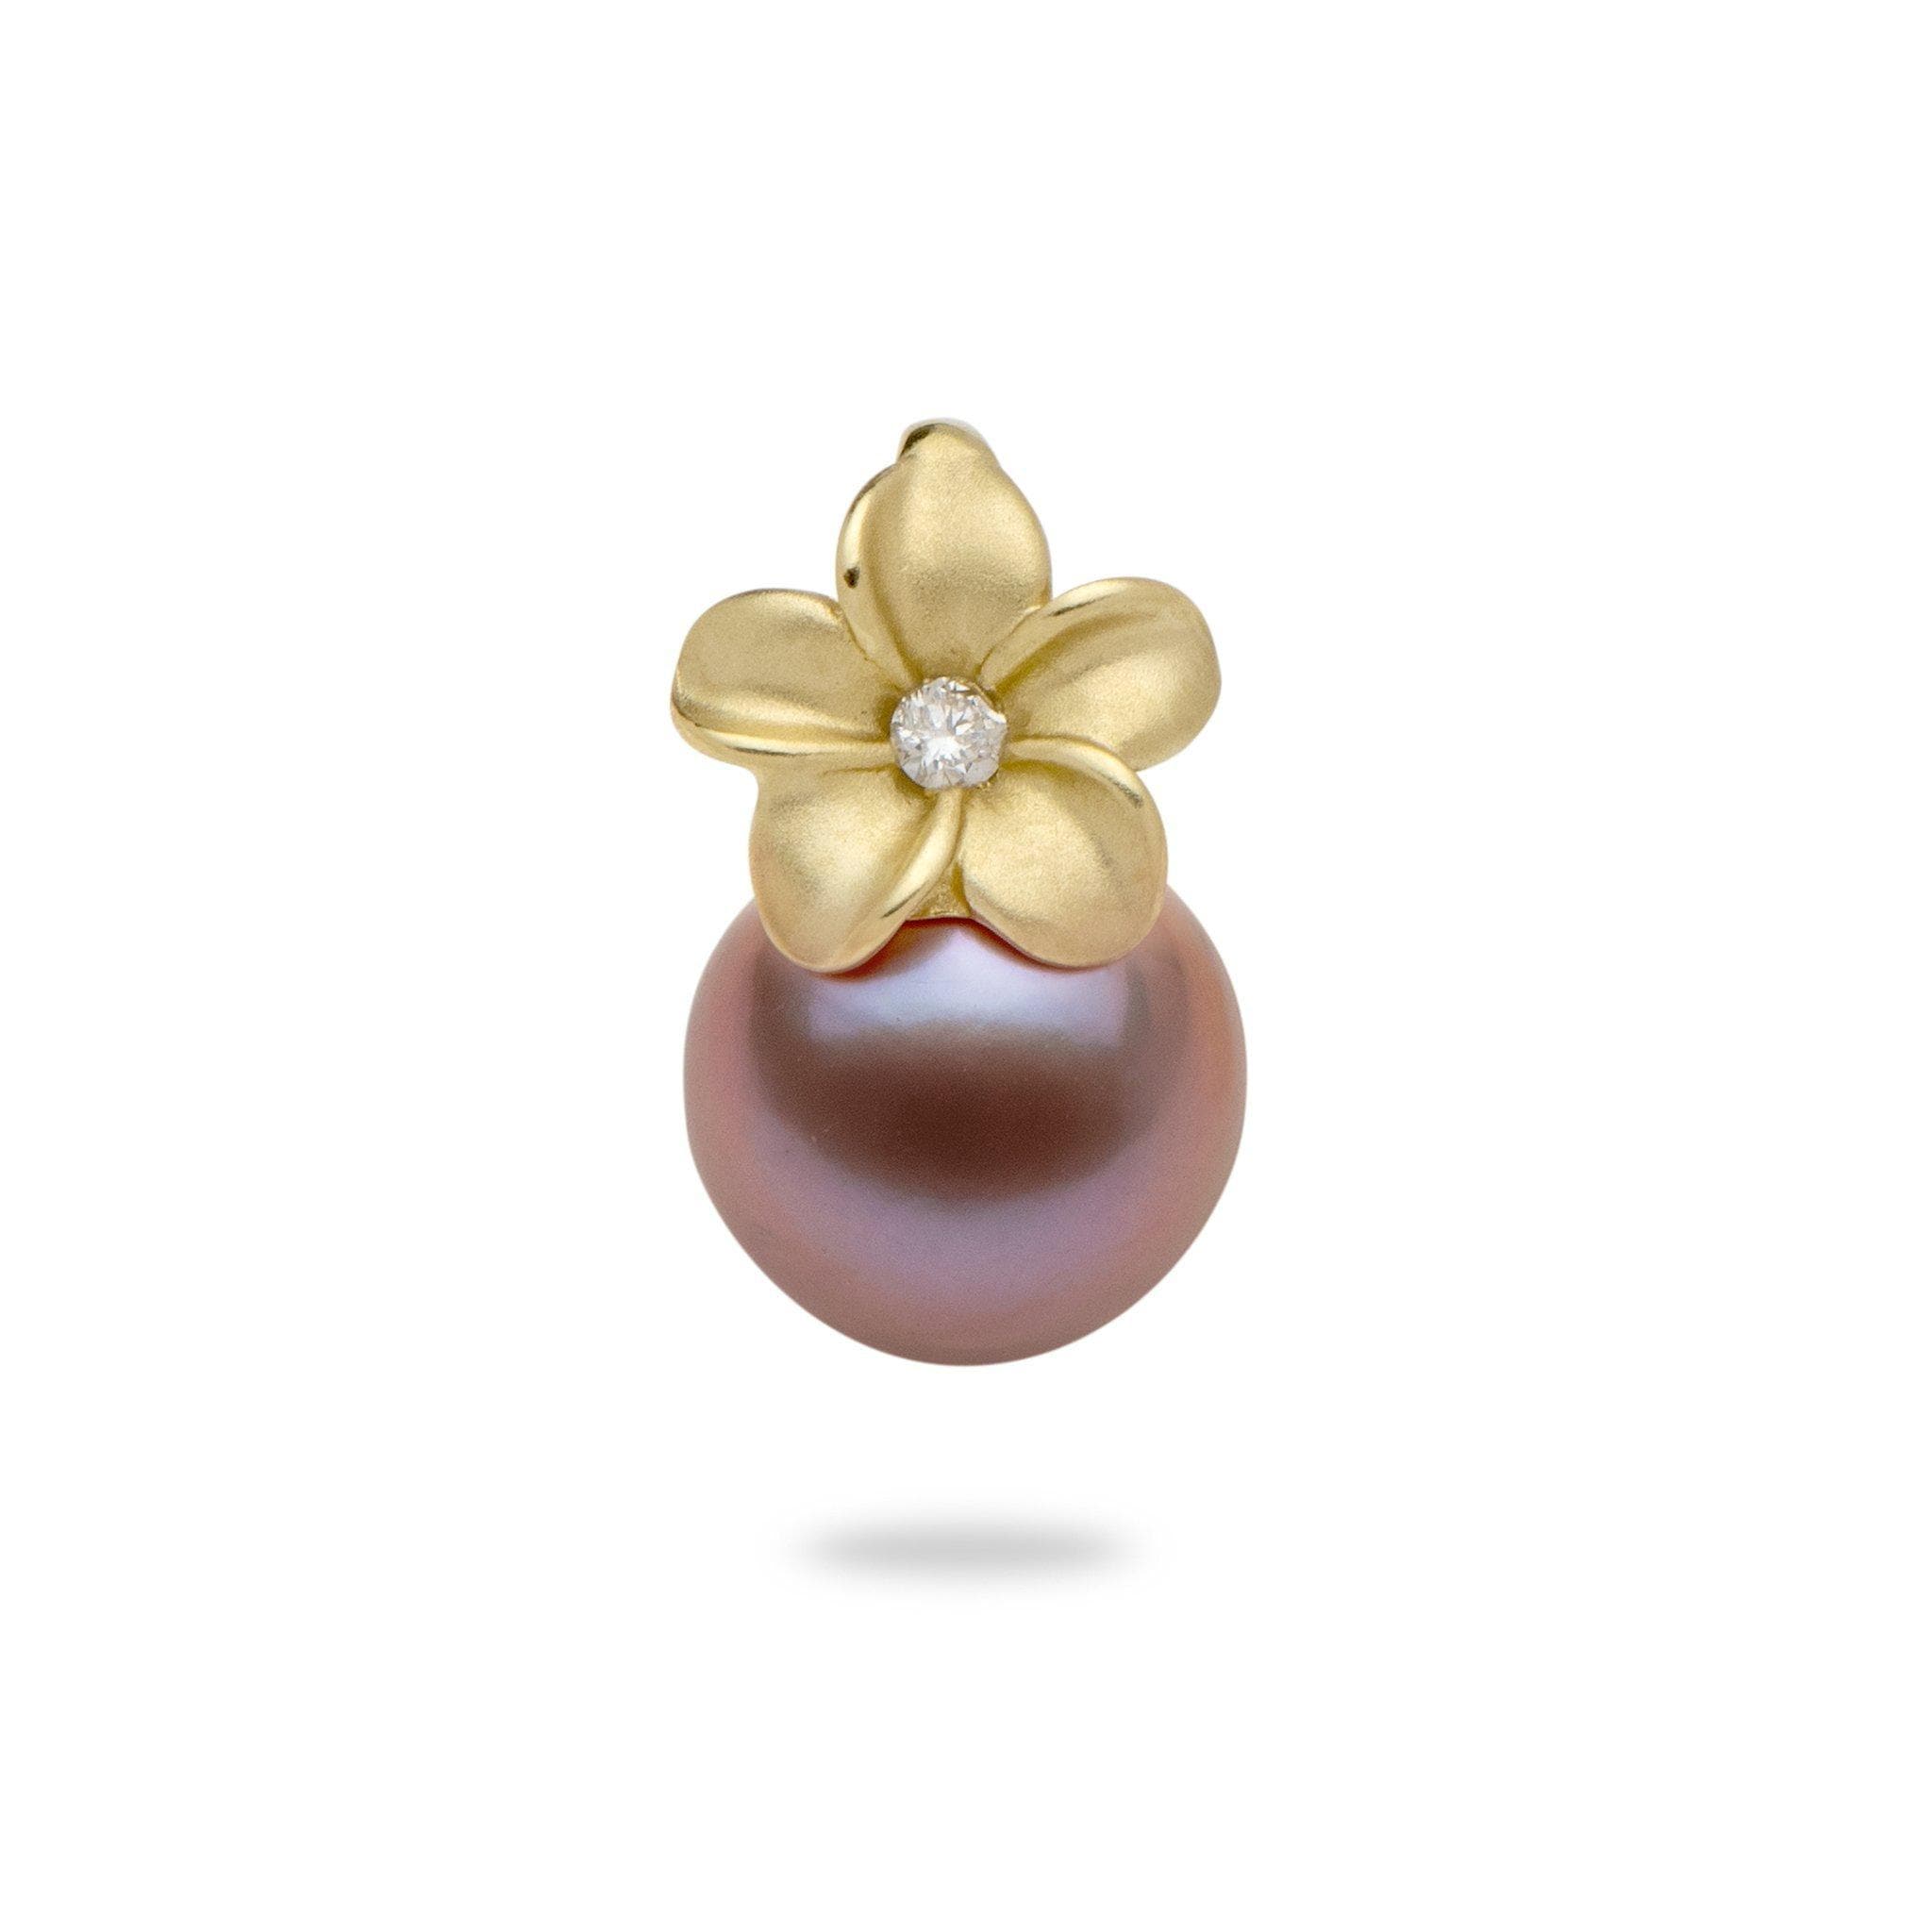 Plumeria Freshwater Pearl Pendant in Gold with Diamond - 9mm-Maui Divers Jewelry